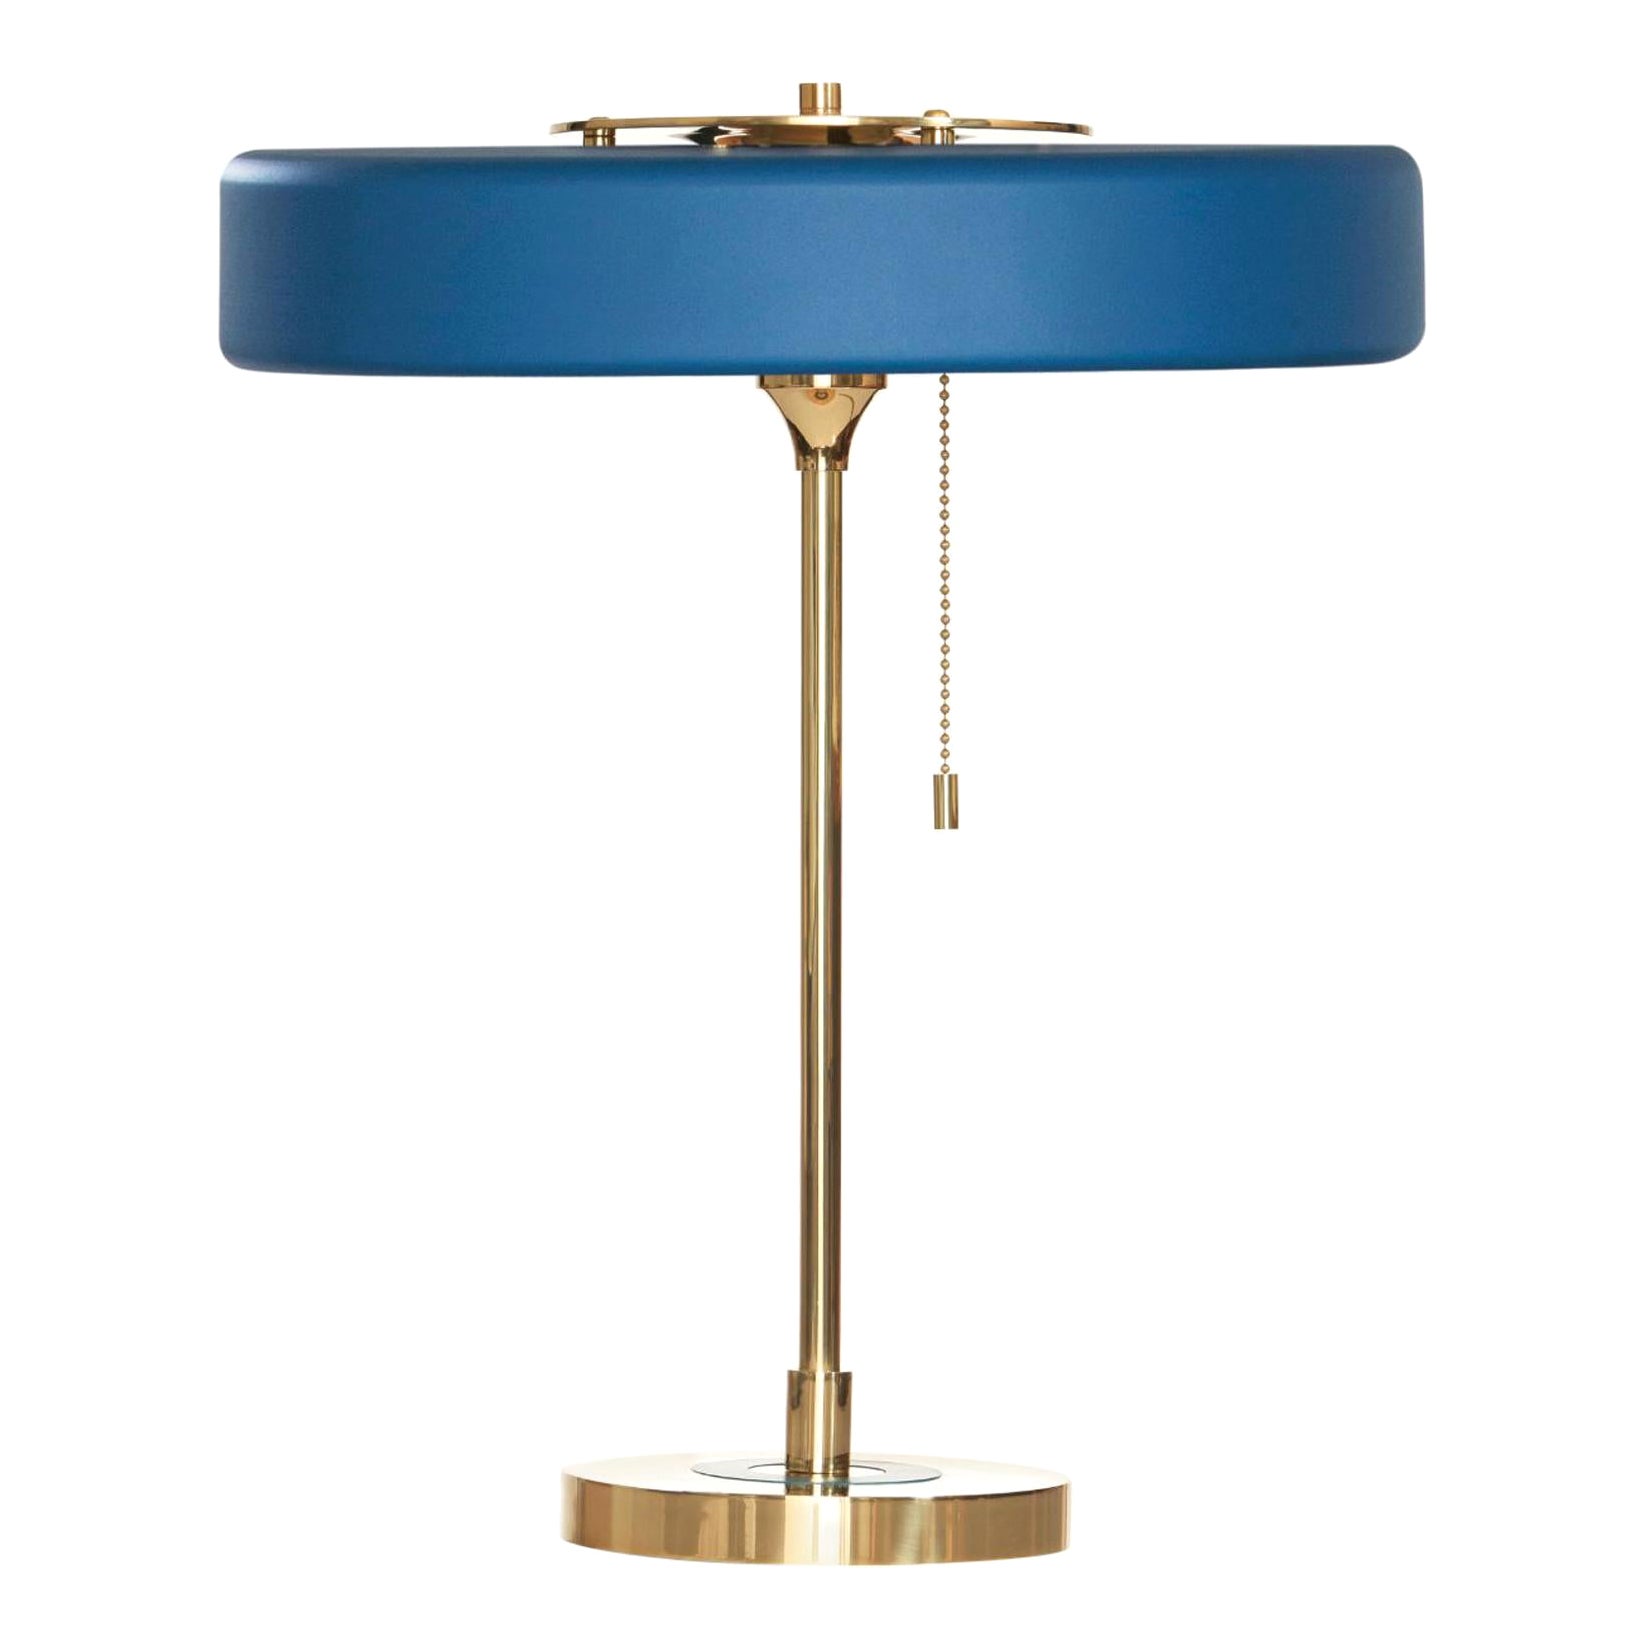 Revolve Table Lamp, Brushed Brass, Blue by Bert Frank